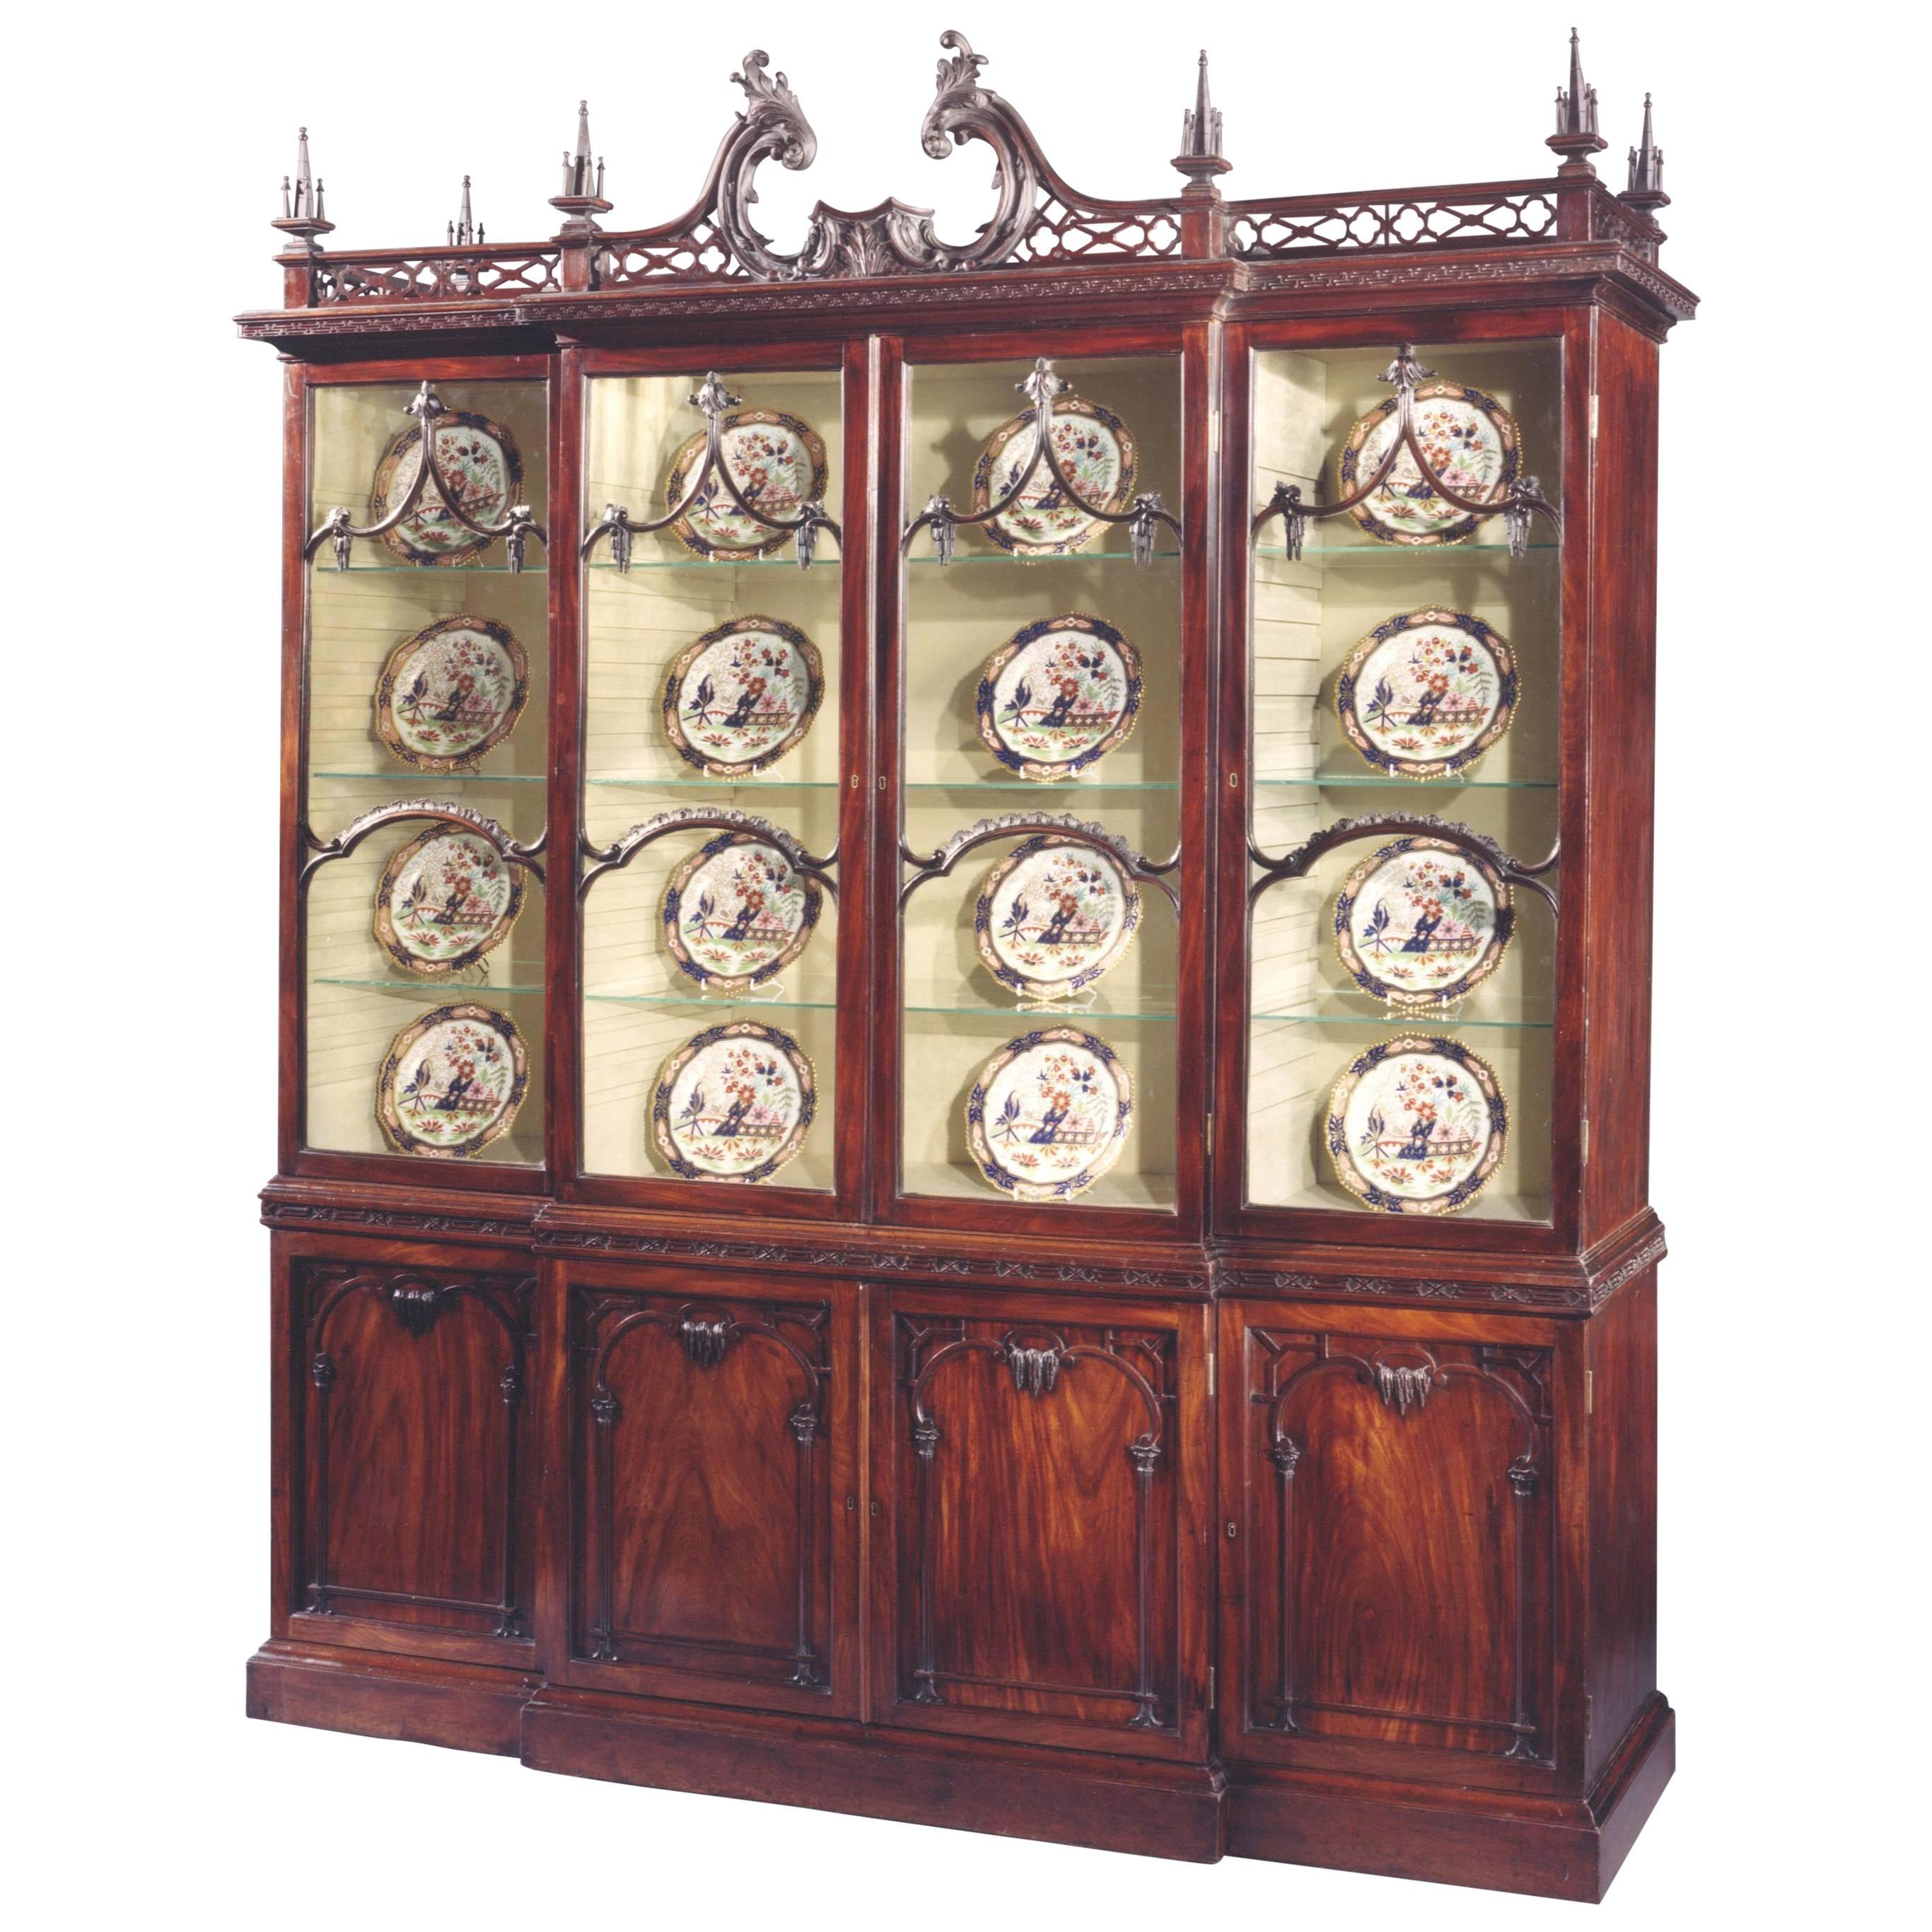 Important George II Mahogany China Cabinet to a Design by Thomas Chippendale For Sale